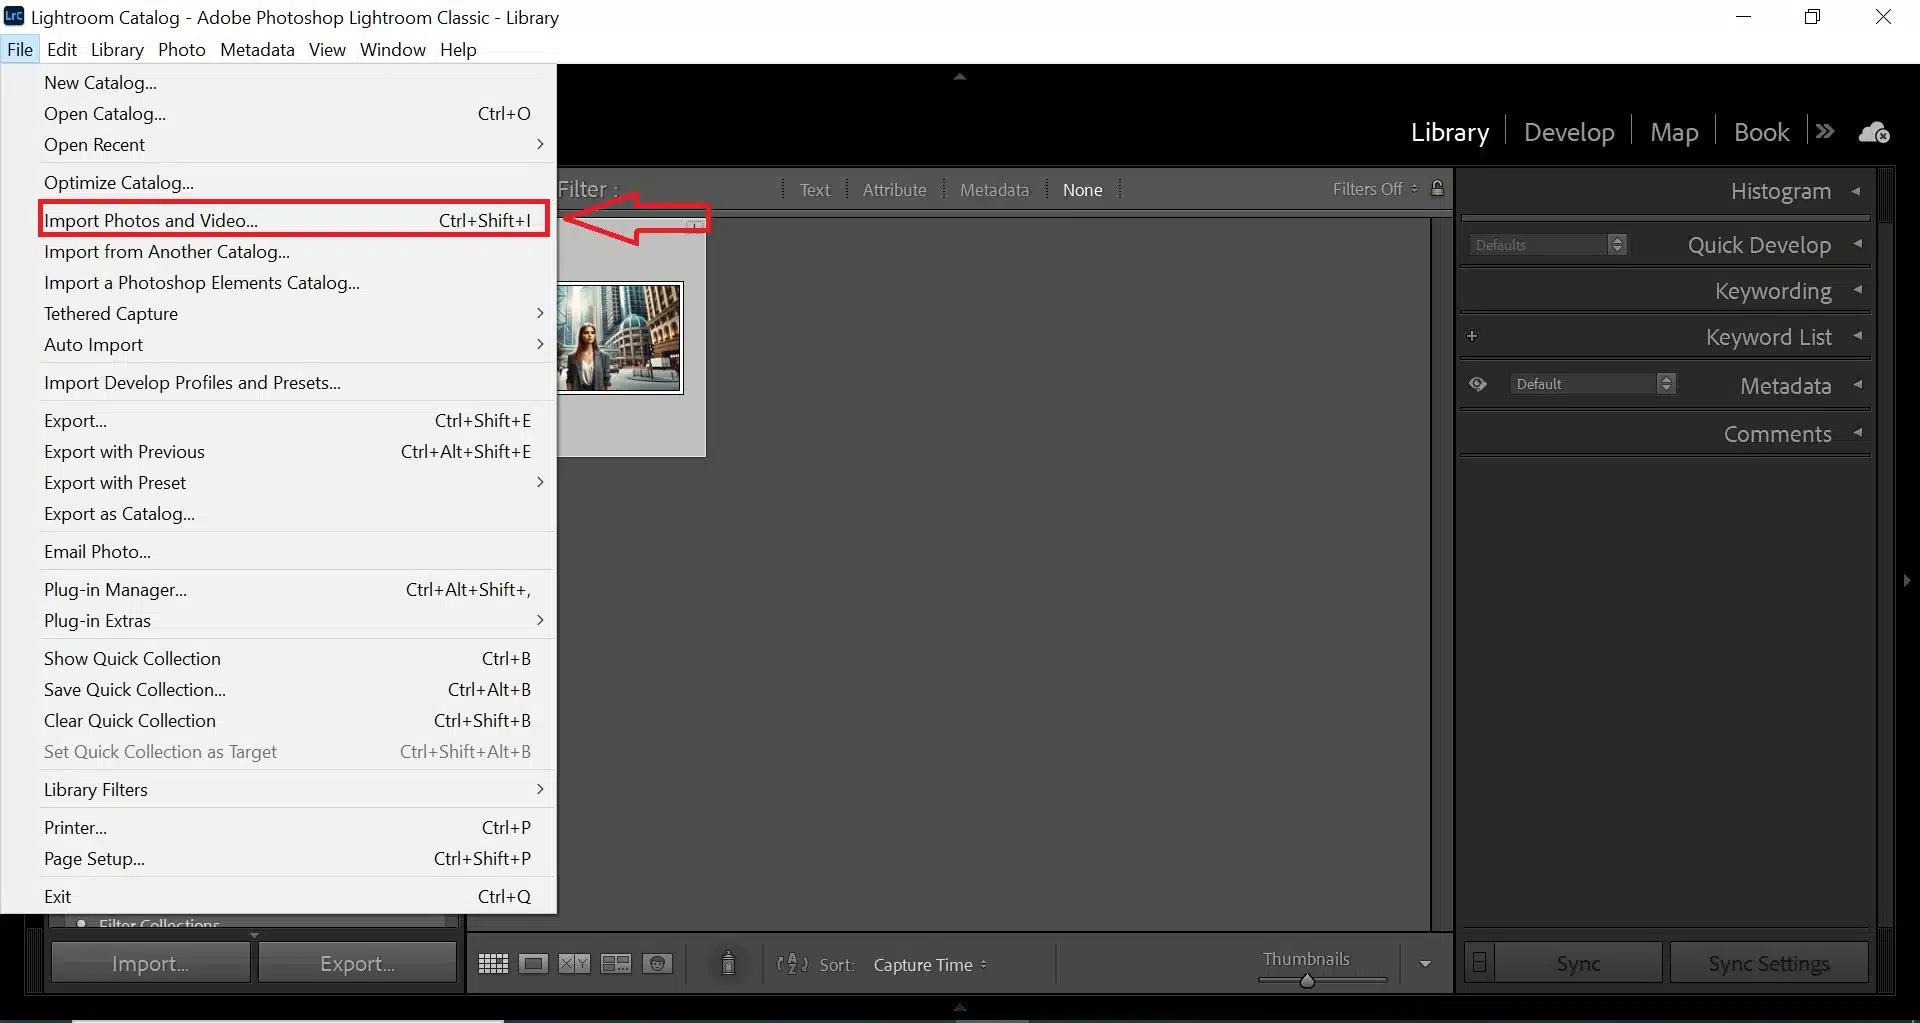 A screenshot of the Lightroom interface showing the process of importing photos and video, with the "Import Photos and Video" option highlighted in the File menu. It also depicts How to Blur Background in Lightroom